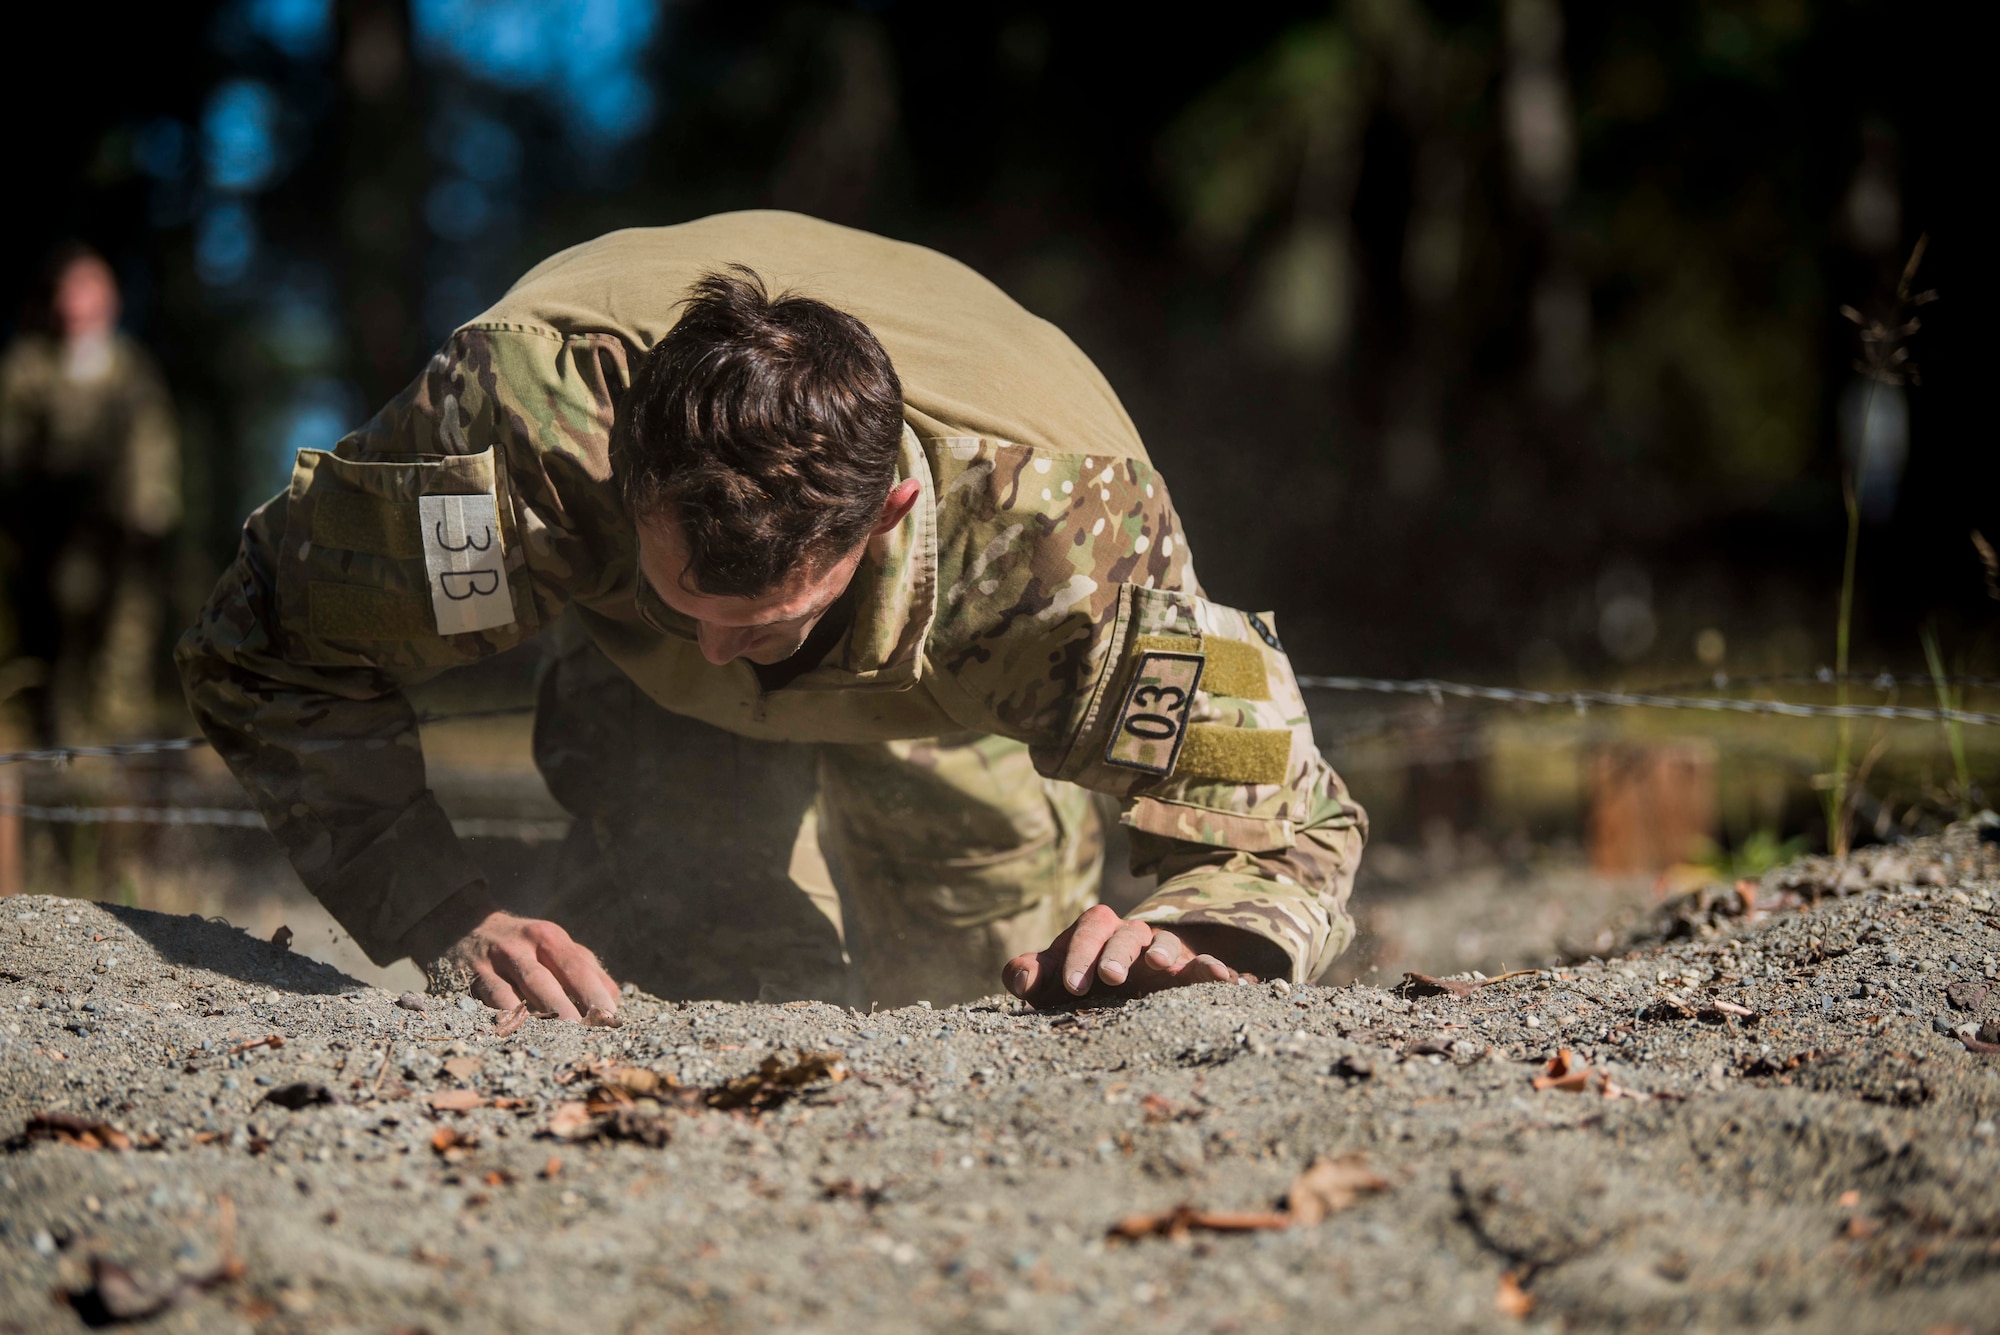 A U.S. Air Force Tactical Air Control Party (TACP) Airman assigned to the 5th Air Support Operations Squadron, Joint Base Lewis-McChord (JBLM), Wash., low crawls through sand during the 2019 Lightning Challenge at JBLM, Wash., July 29, 2019.